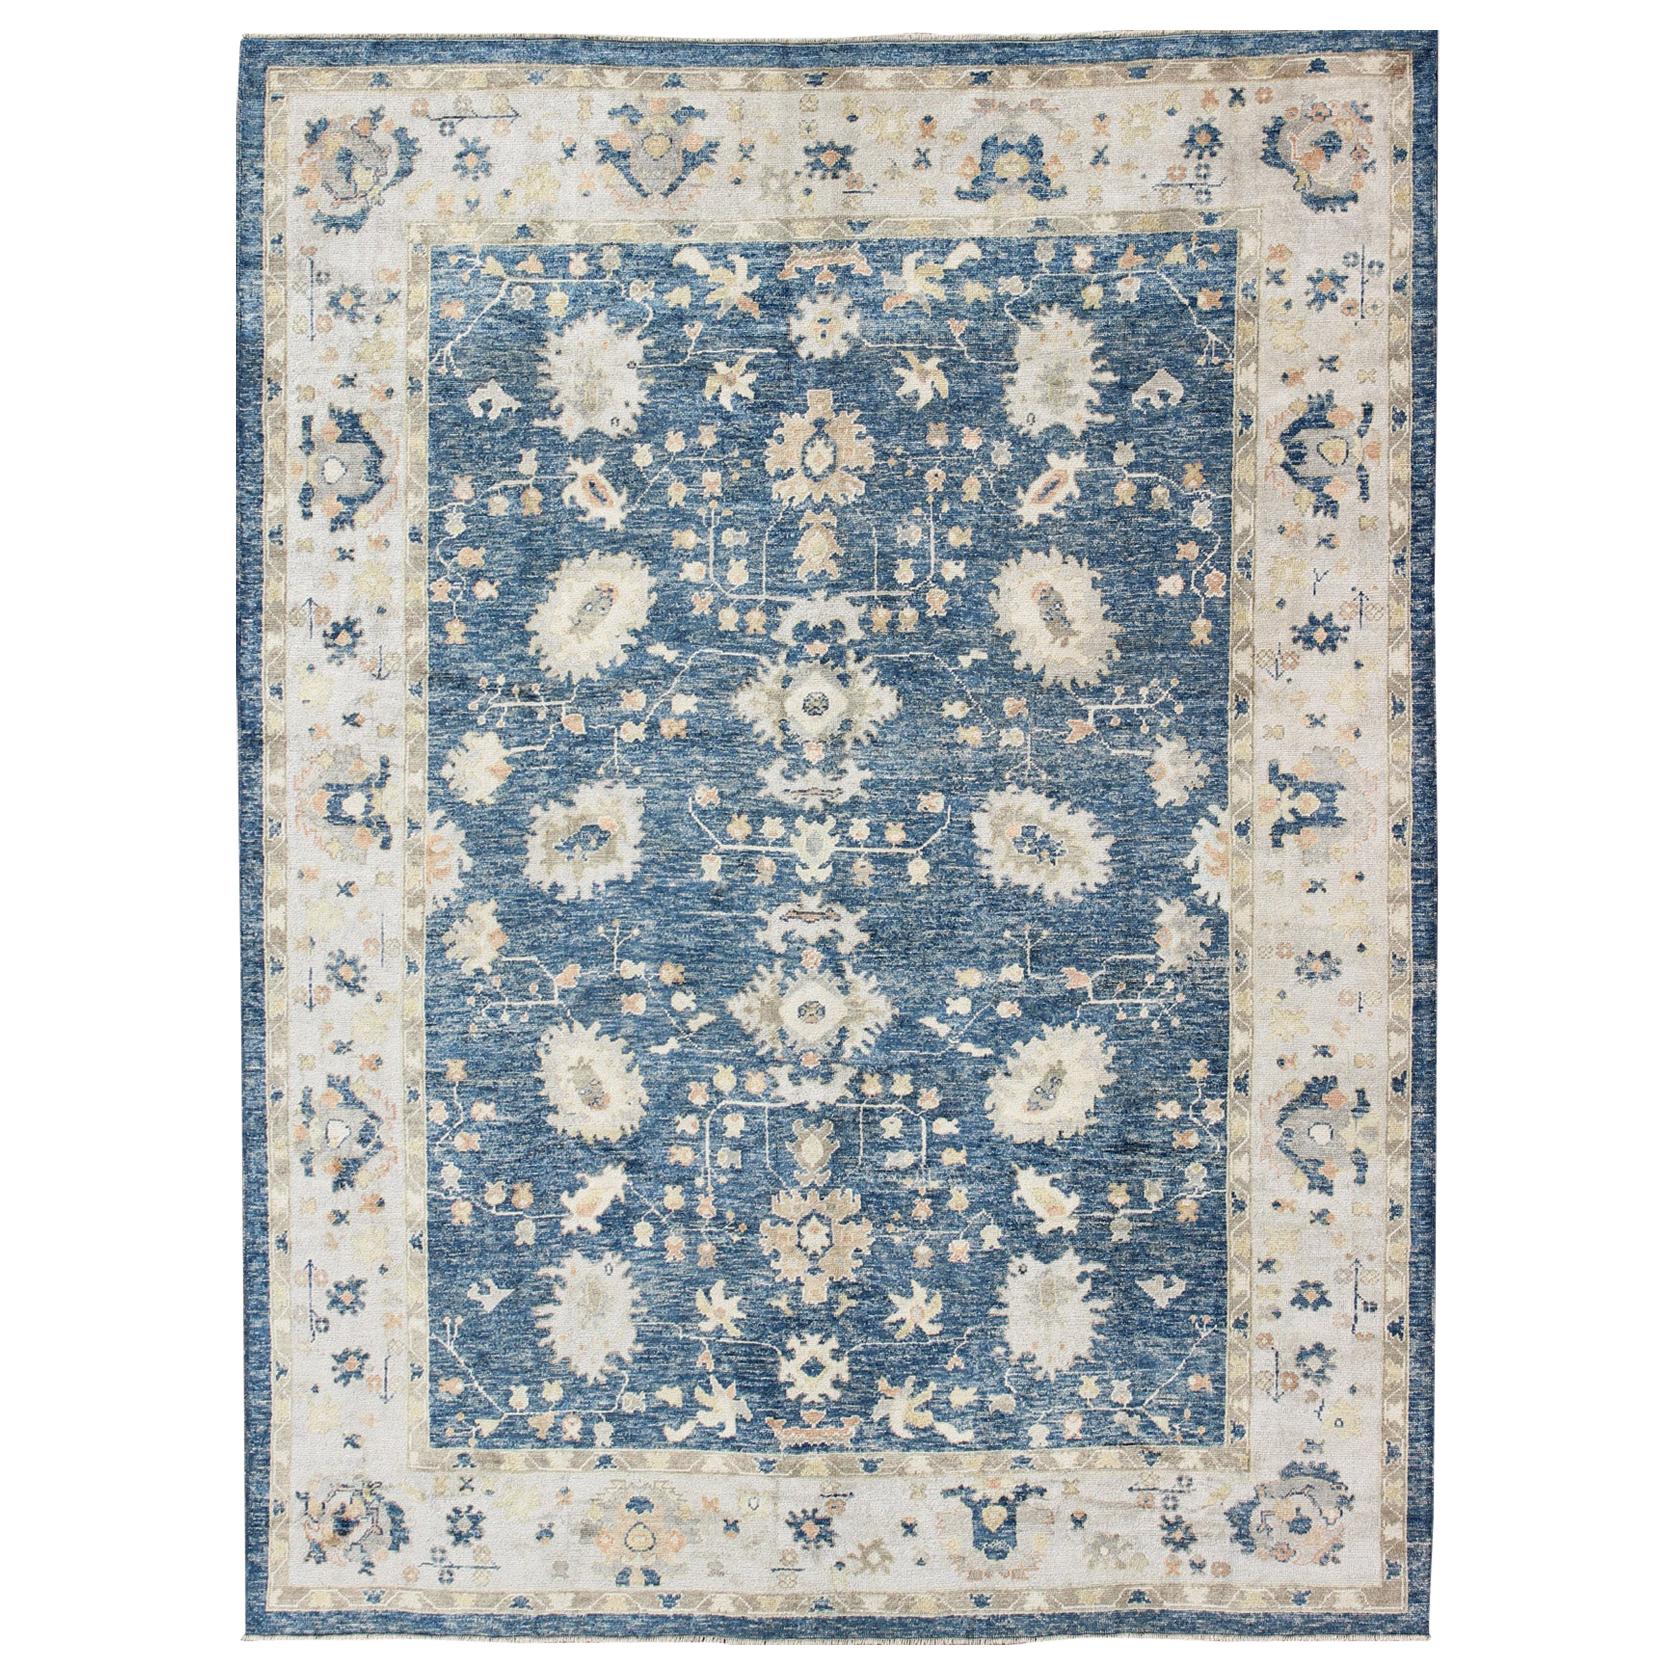 Turkish Oushak Rug in Blue Background, Neutral Colors and All-Over Design